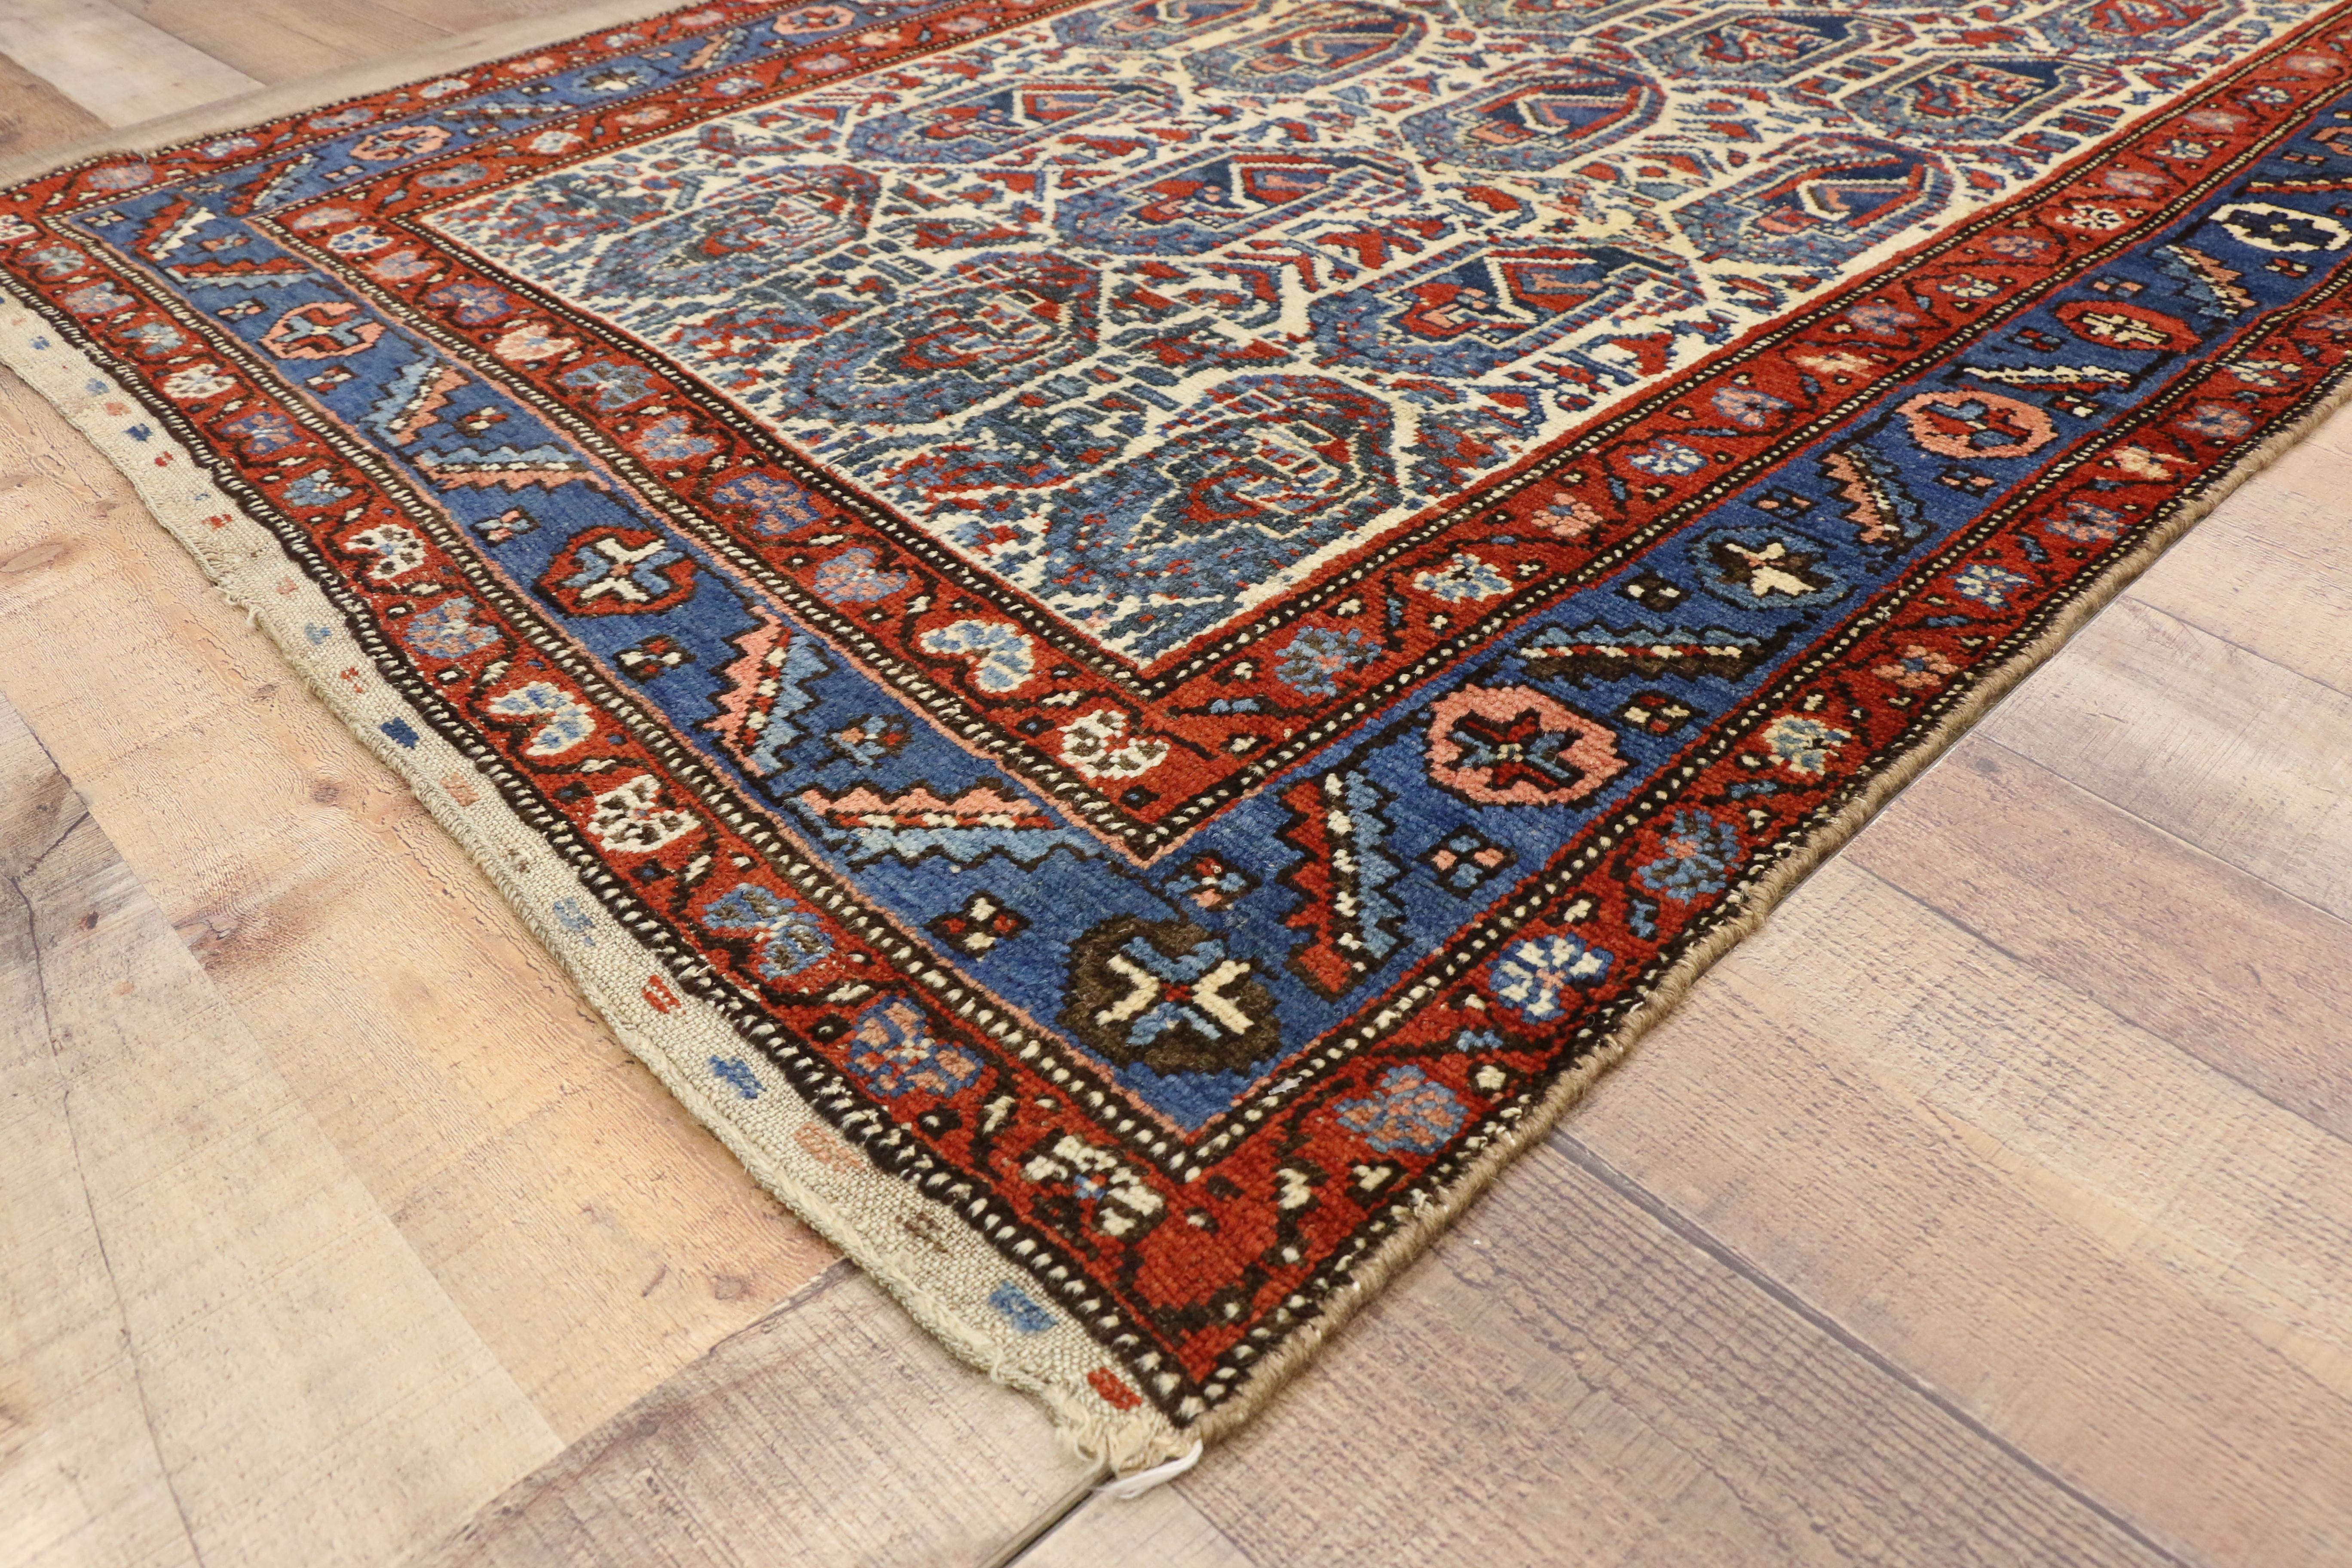 71867, vintage Kurd rug with Blue Boteh pattern. This hand knotted wool vintage Persian Kurd rug with Blue Boteh pattern is a stunning example of Kurdish weaving. Blue botehs also known as paisleys cover the white center field. Set with angular red